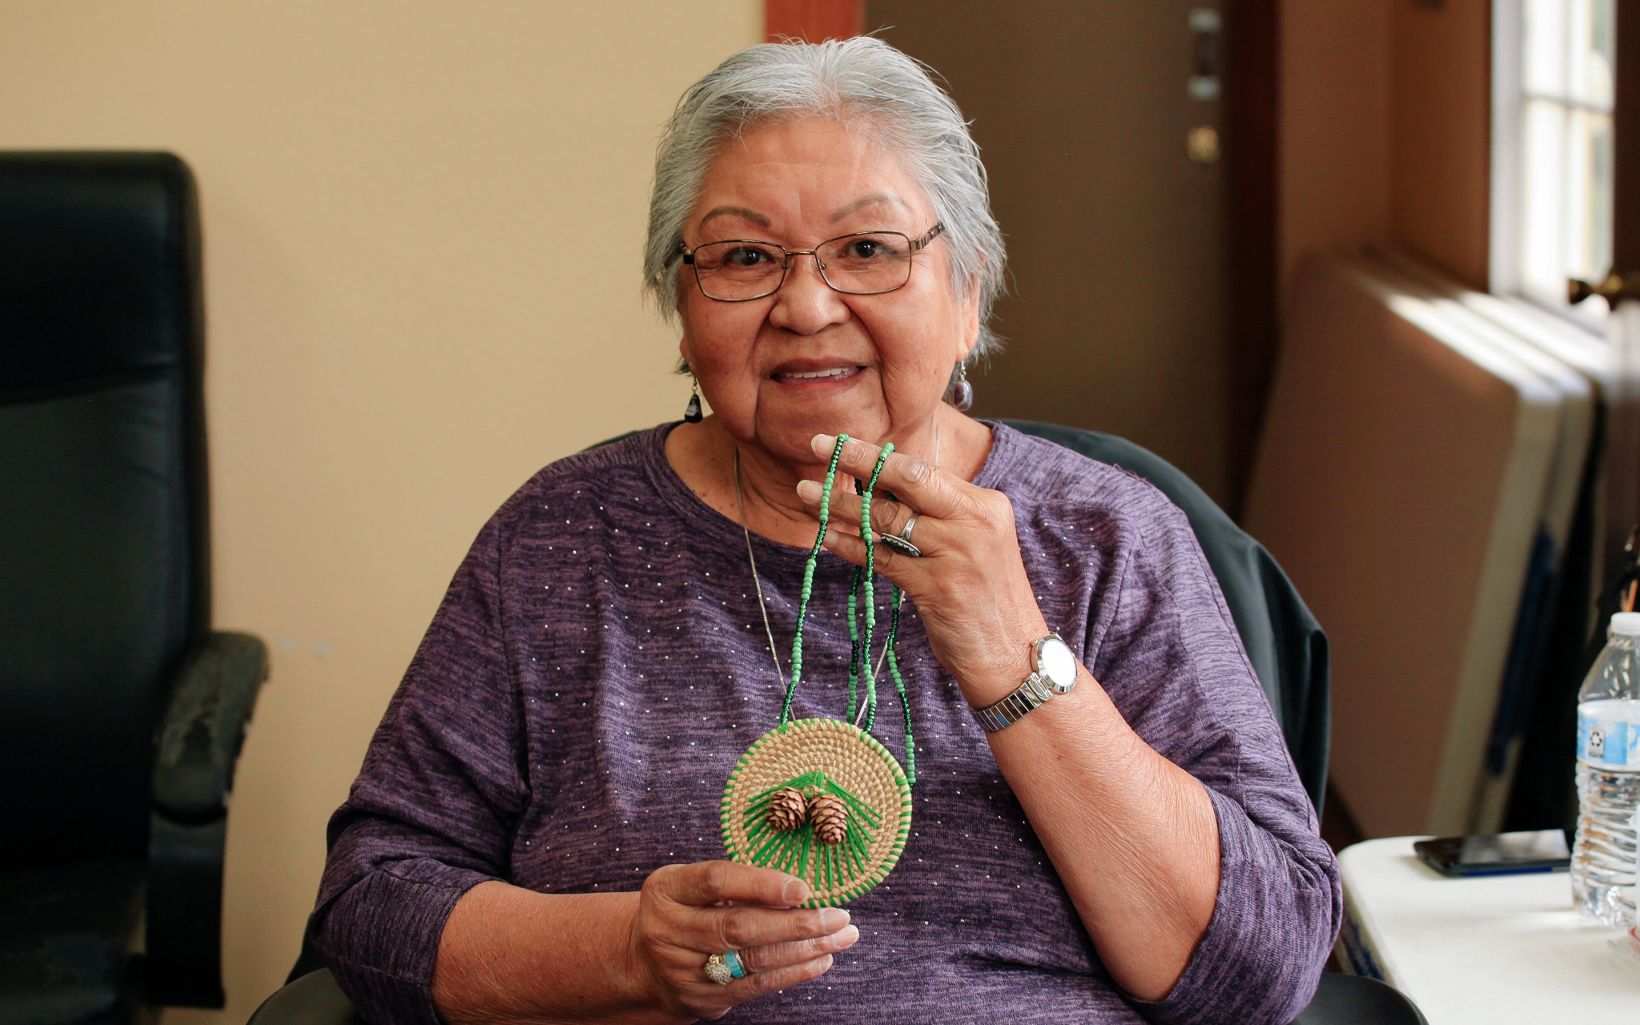 Joyce Poncho of the Alabama-Coushatta Tribe of Texas sits, holding a circular pendant necklace woven from longleaf pine needles that is decorated with green raffia, pinecones, and green beads.